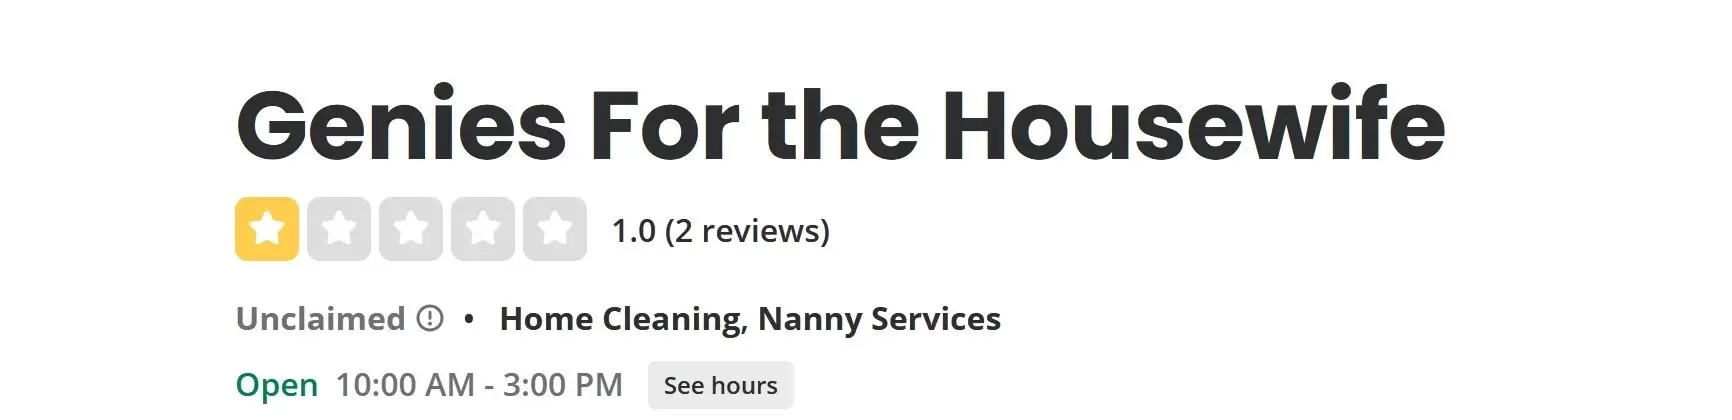 positive review of Genies for the Housewife